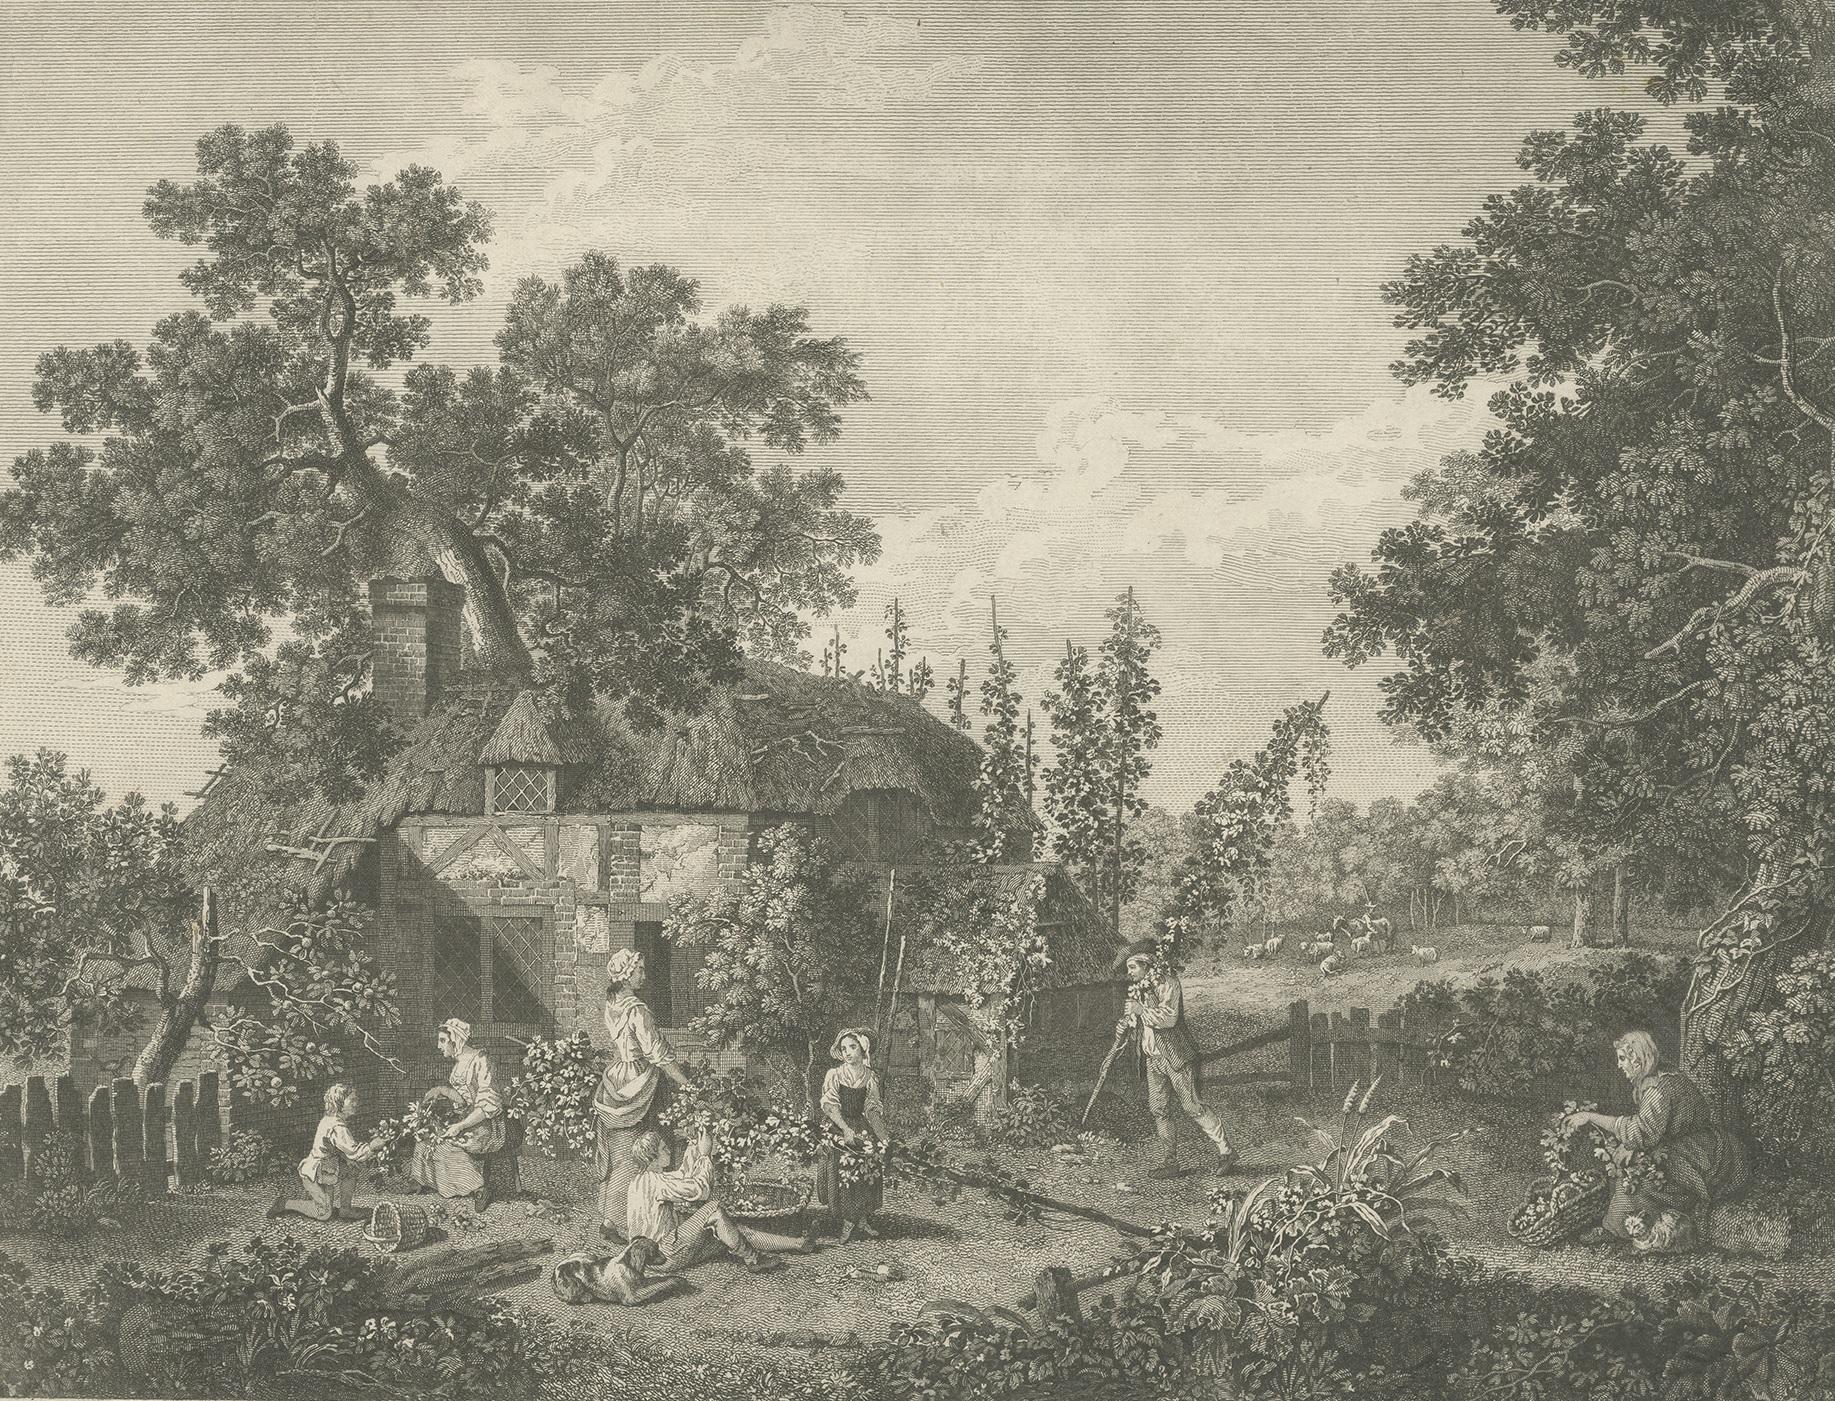 Antique print of hop pickers. It shows a family outside a thatched cottage with casement windows, gathering hops; an elderly woman sitting under a tre to left with a cat, picking hops from a branch and putting them into a basket, a man carrying a